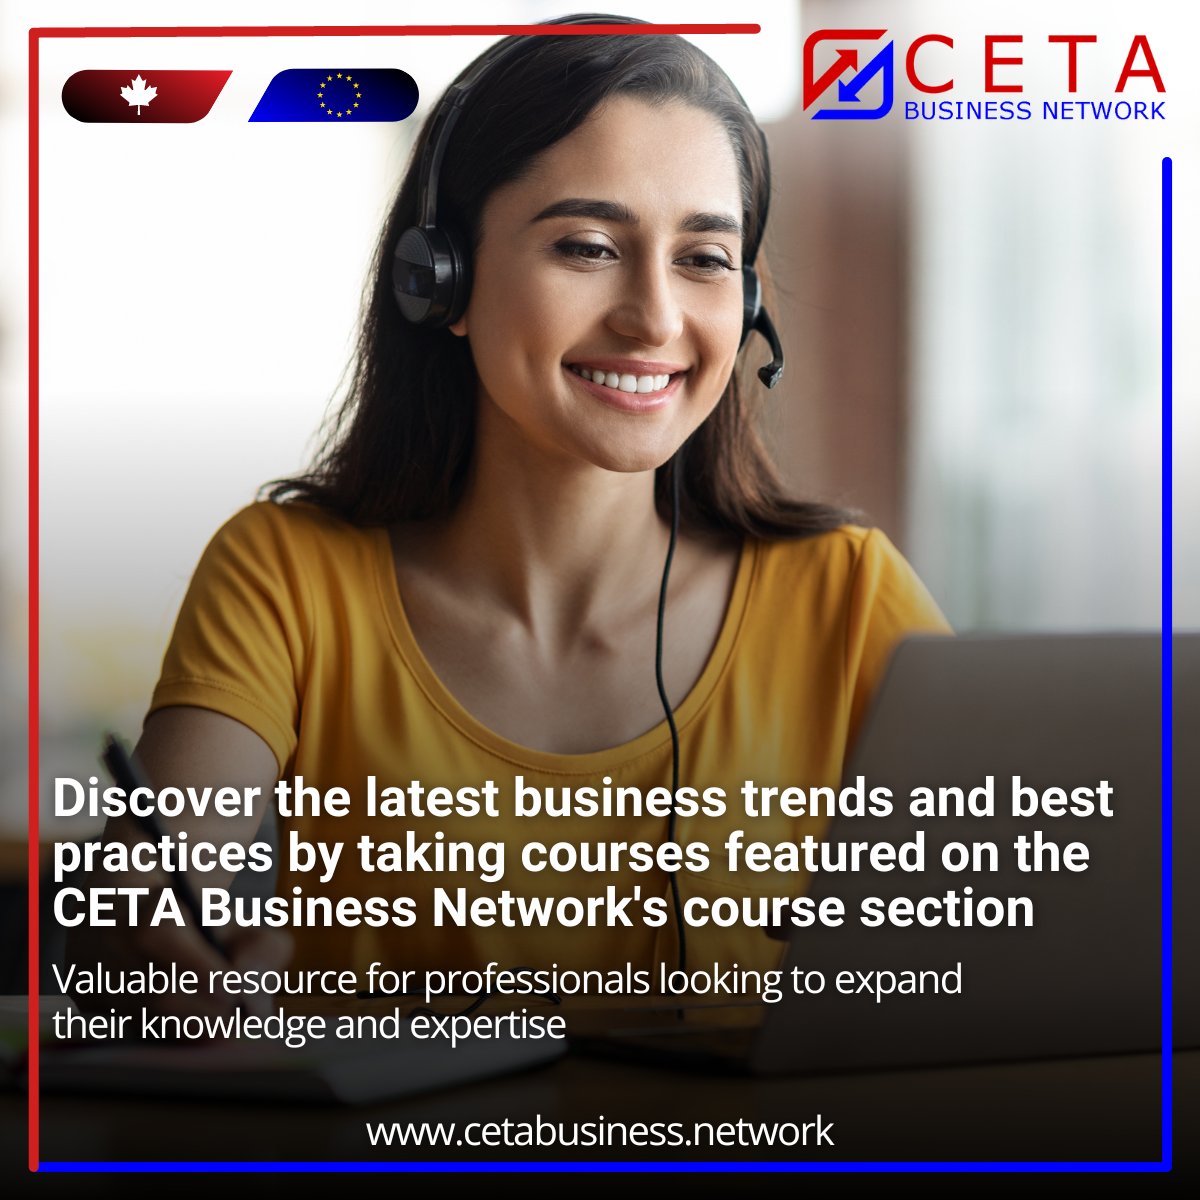 The #CETABusinessNetwork's #course section offers a variety of online and offline #learning options to fit your schedule and #needs. Plus, become an #instructor and sell your #courses!
cetabusiness.network/learning/

#CETA #Business #sell #FlexibleLearning #Online